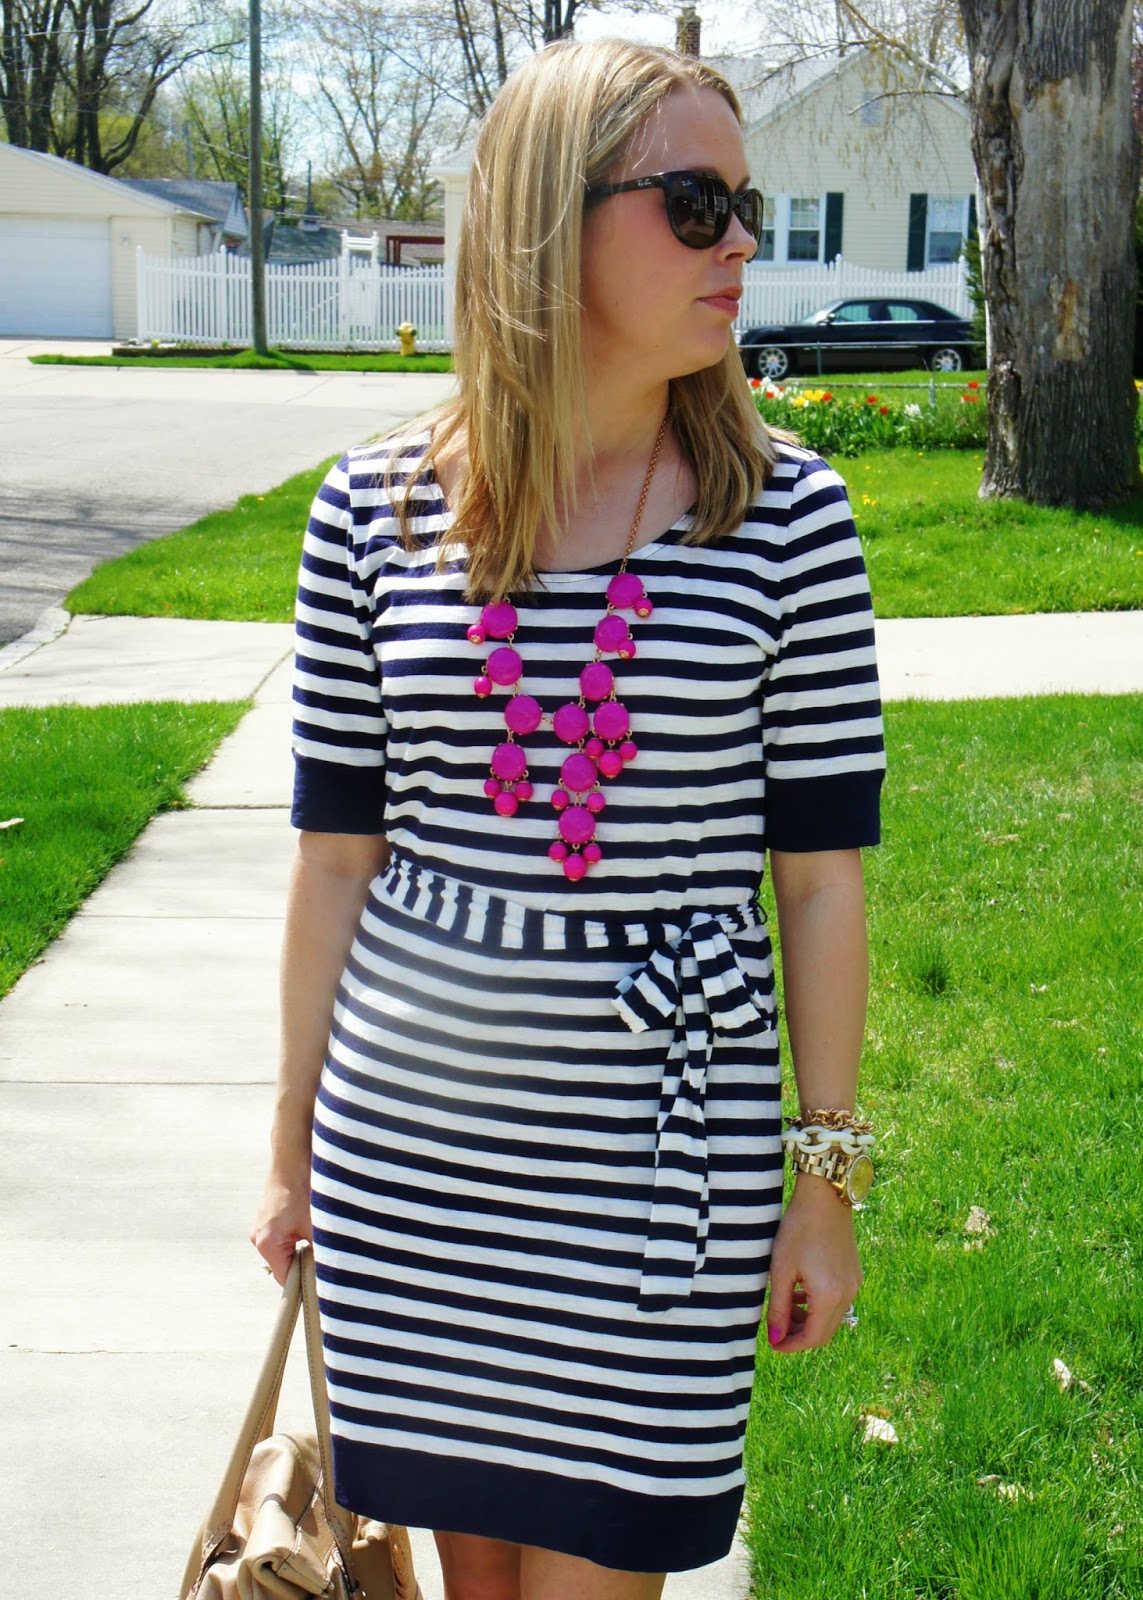 Everyday Fashion and Finance: Navy and White with a Pop of Pink